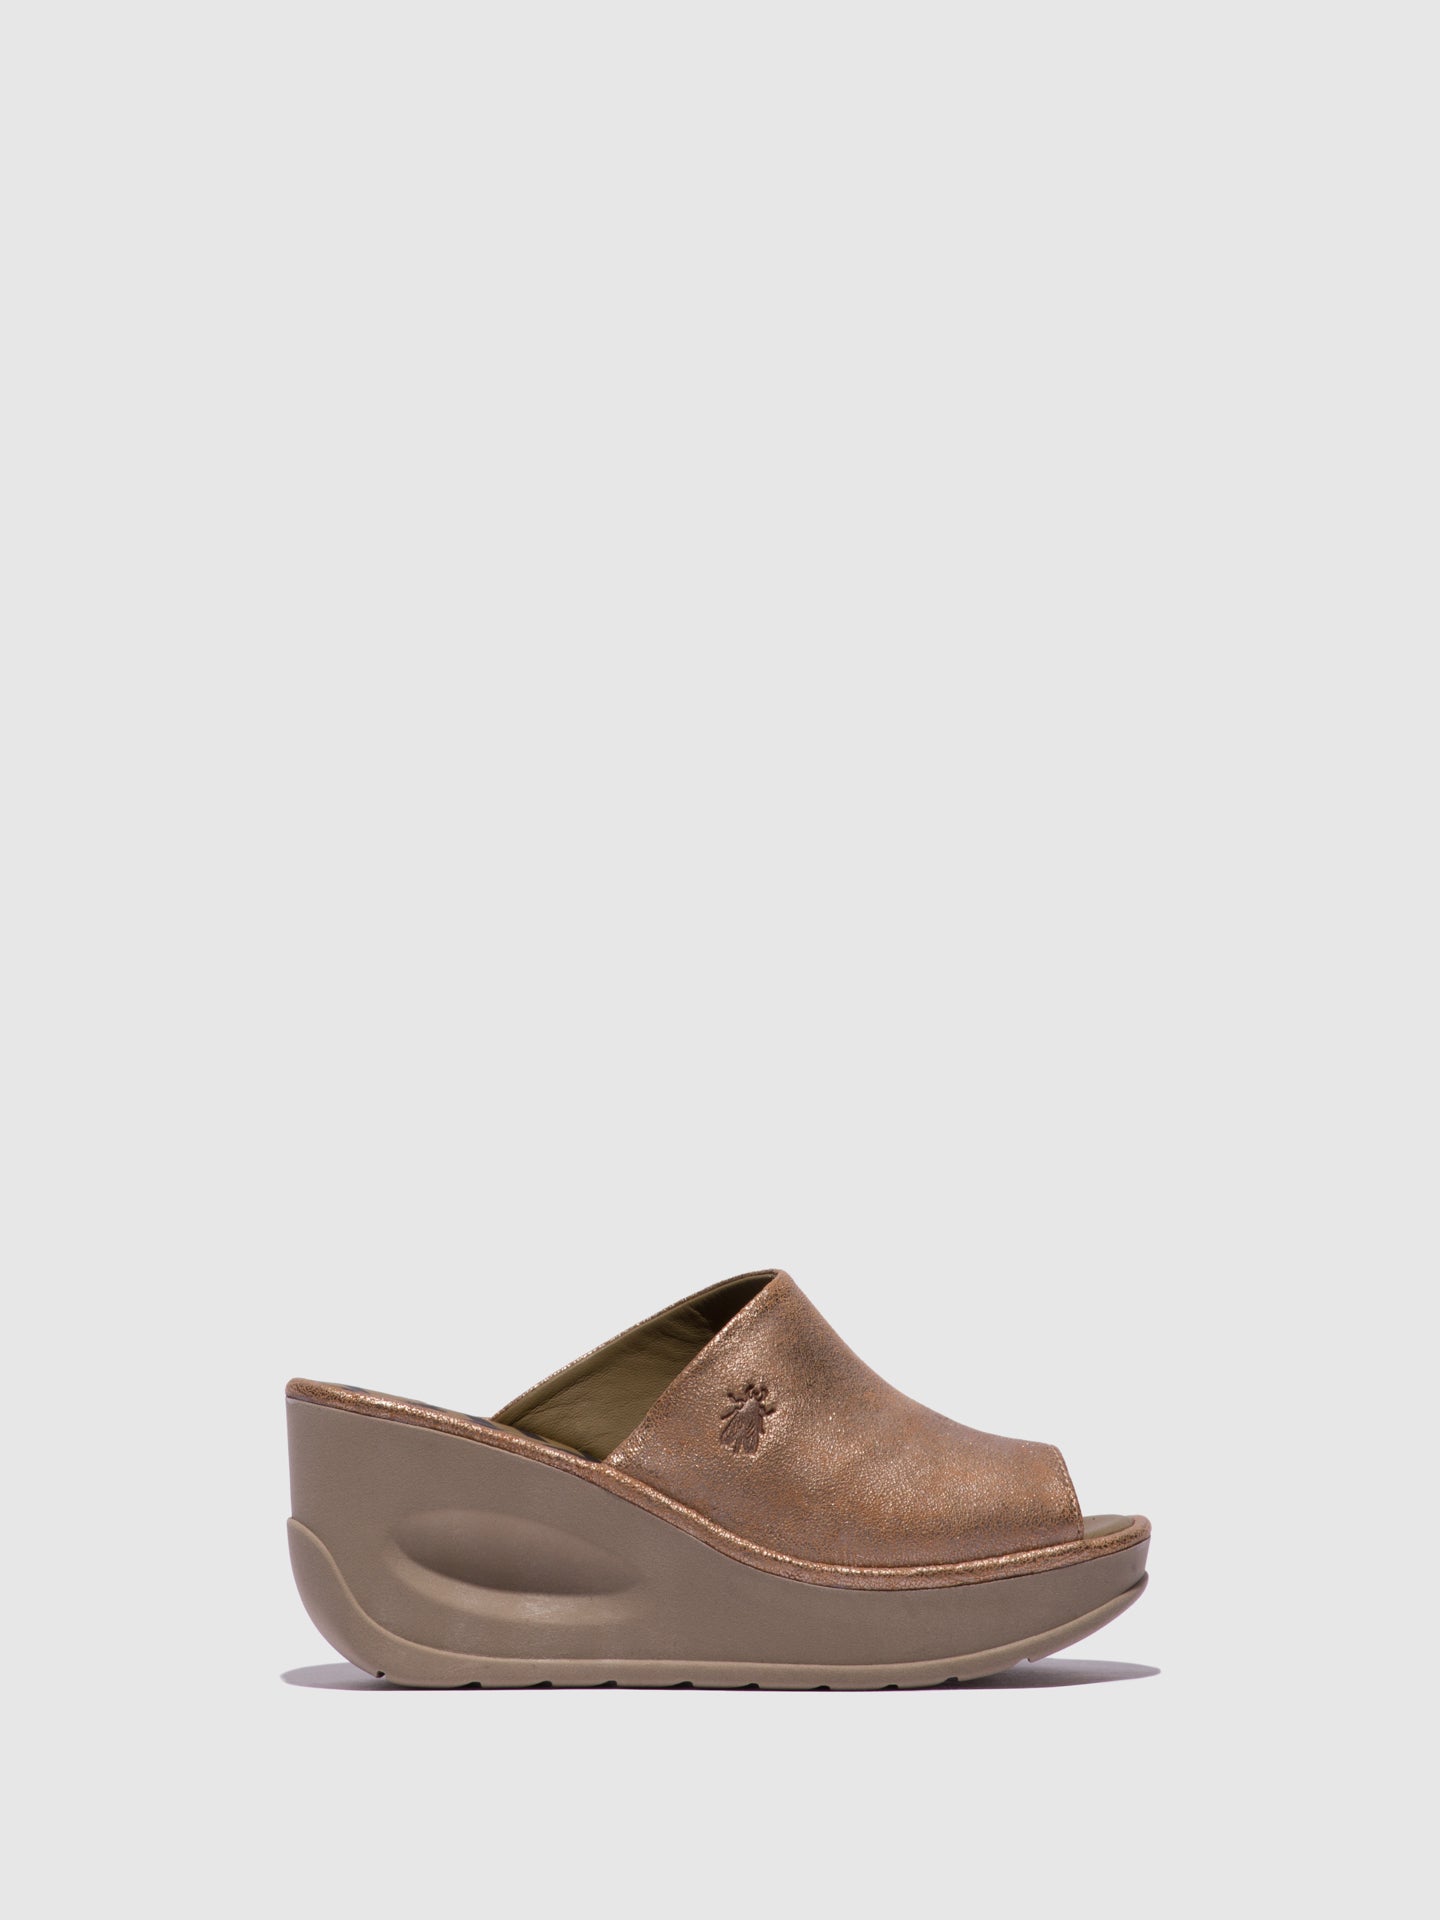 Fly London Gold Wedge Mules